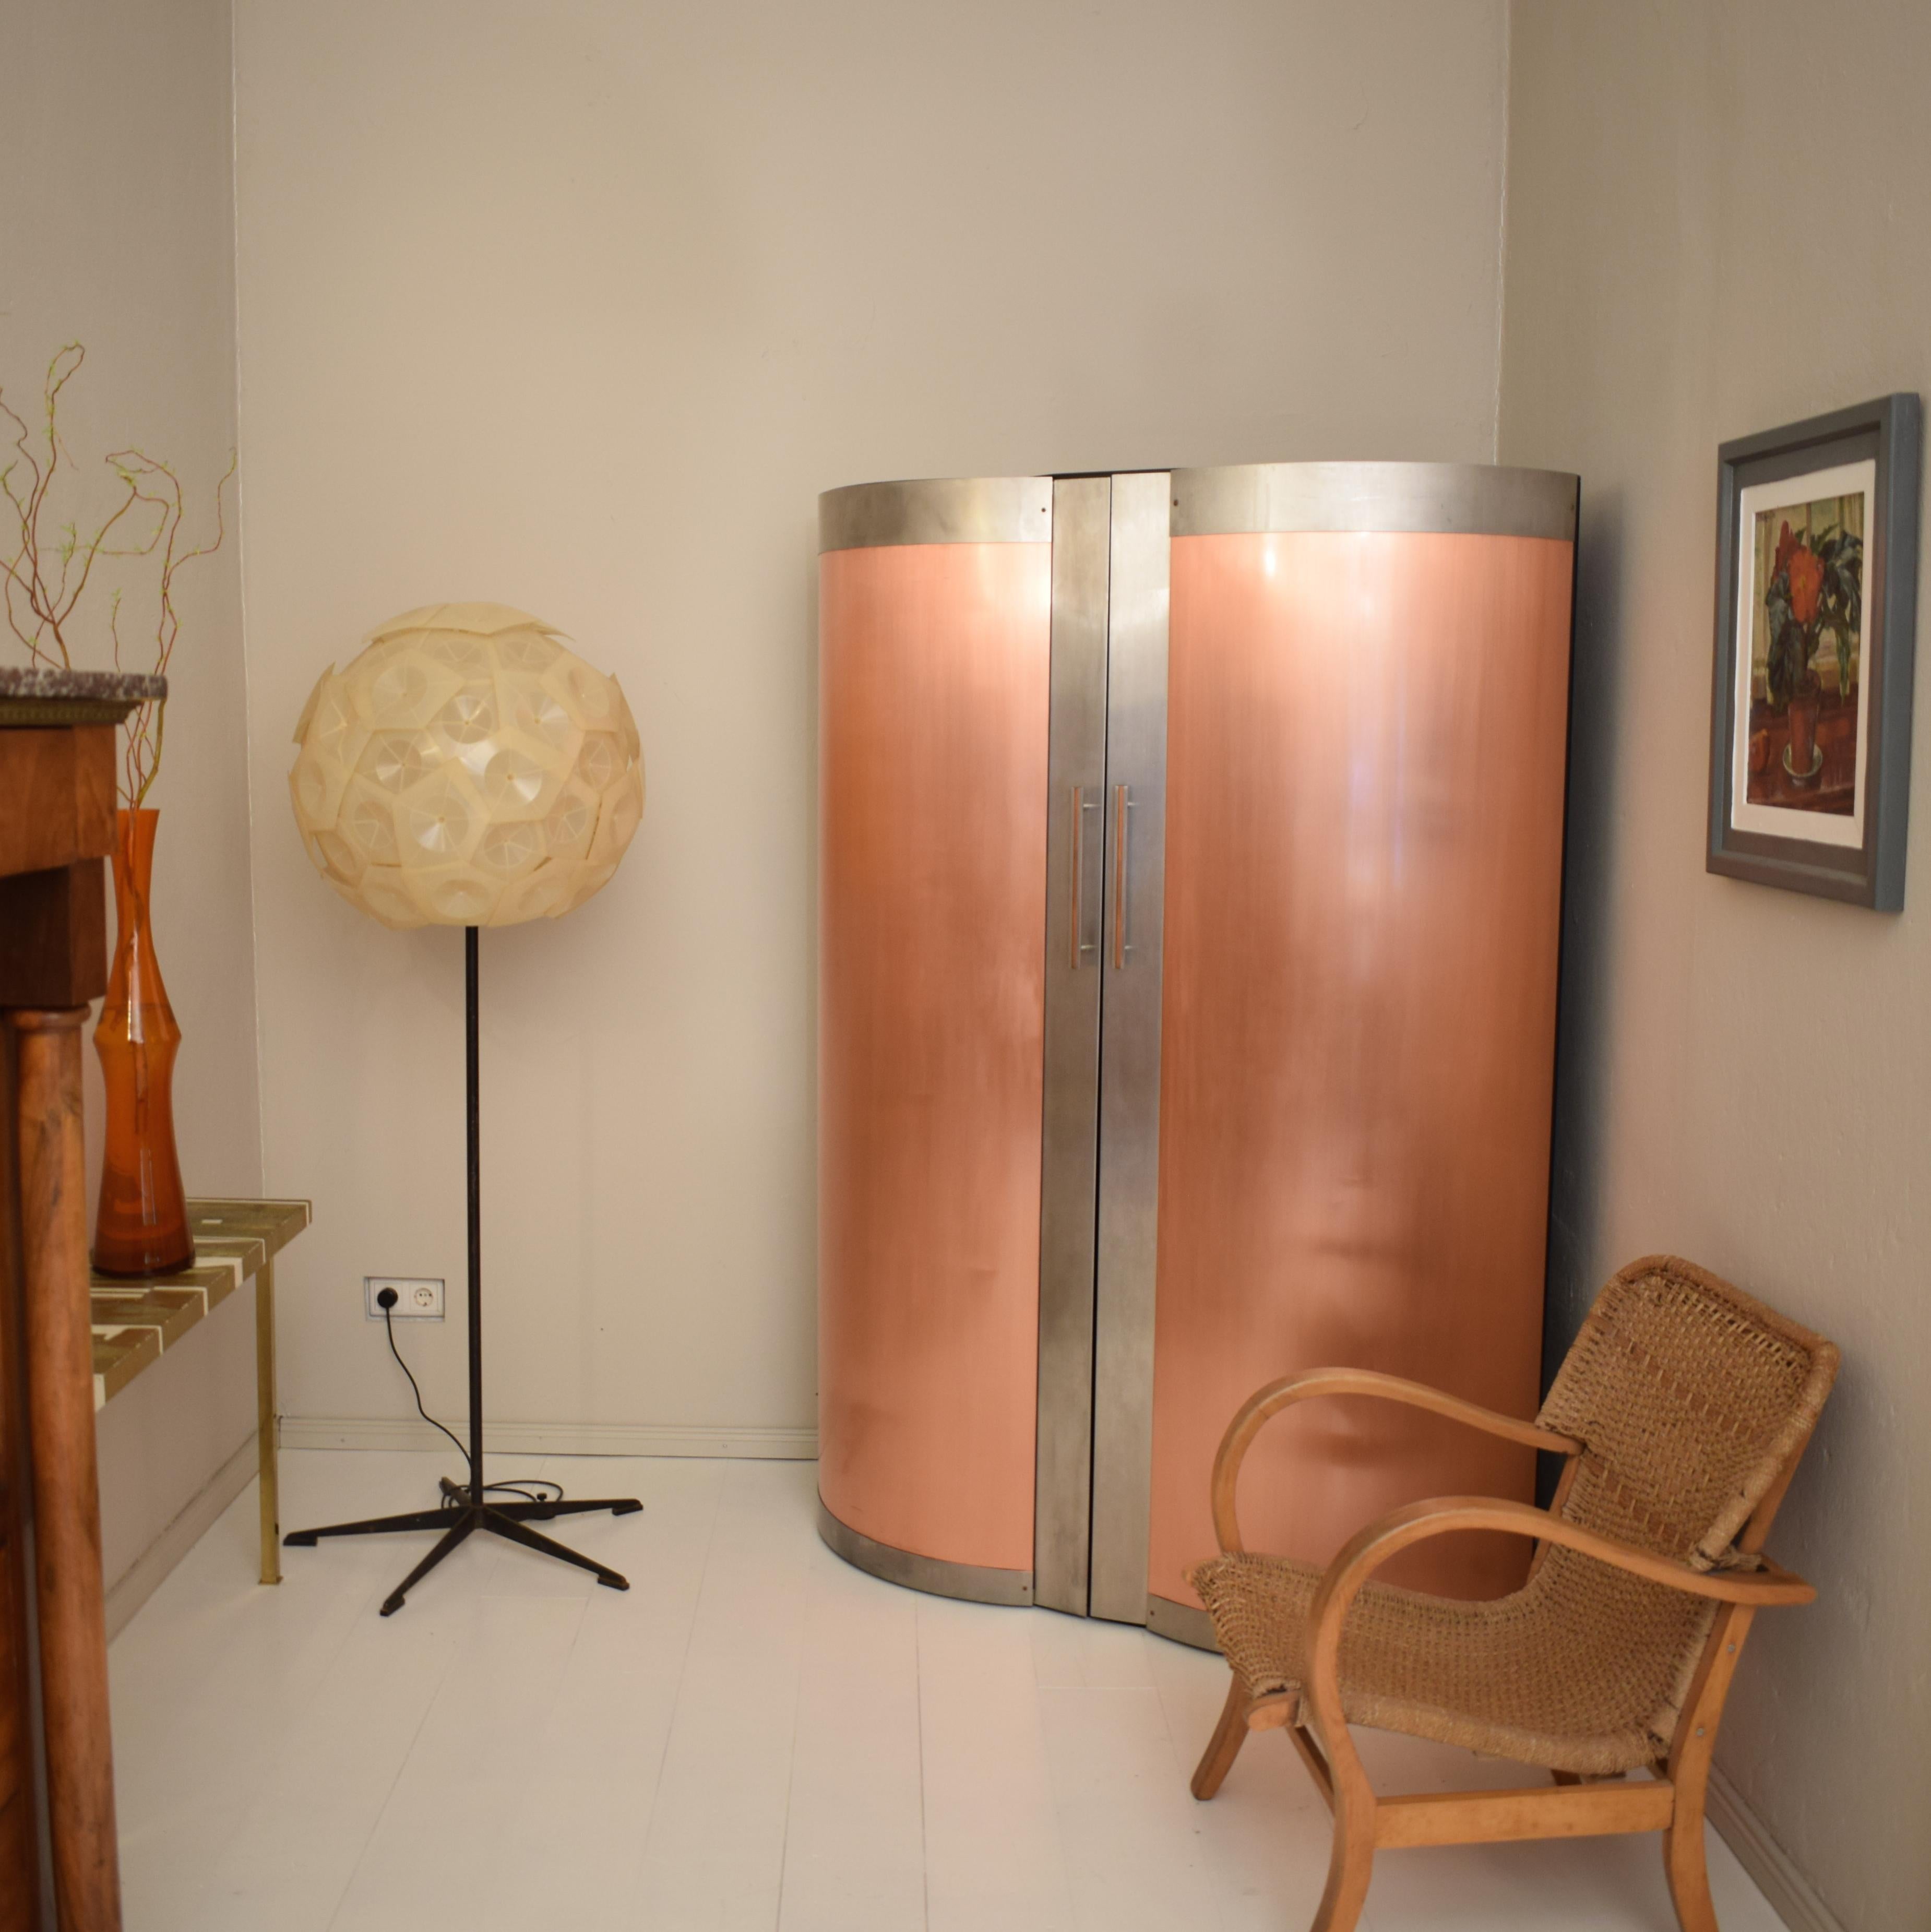 This unique and unusual Italian 1980s corner cabinet / cabinet comes with copper doors.
It has this Space Age or Memphis look.
The cabinet is in good vintage condition. Of course it has some wear over the time, but this gives it a great Patina.
This